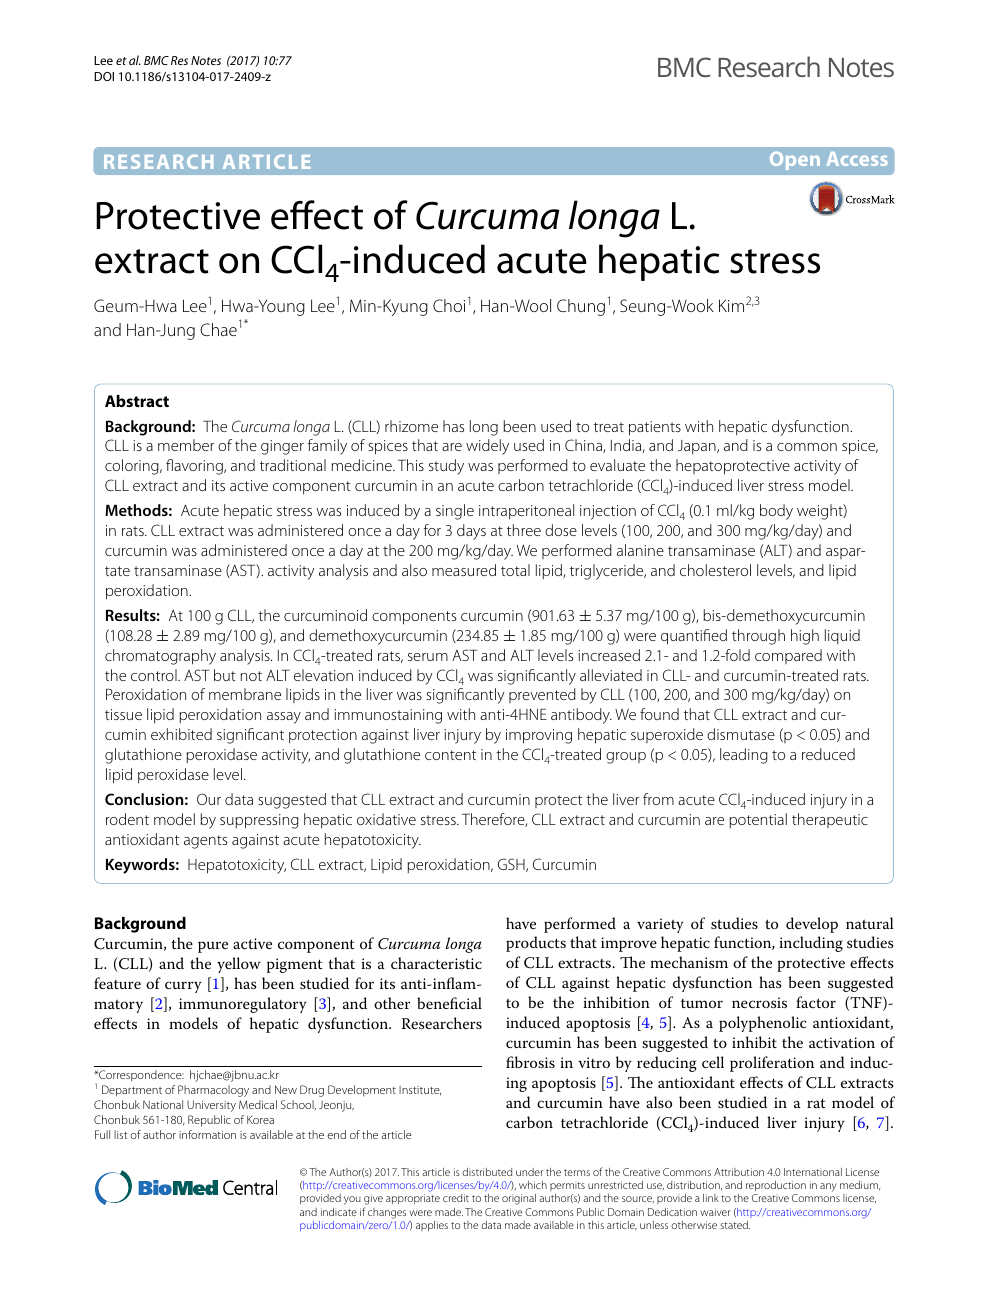 Protective Effect Of Curcuma Longa L Extract On Ccl4 Induced Acute Hepatic Stress Topic Of Research Paper In Veterinary Science Download Scholarly Article Pdf And Read For Free On Cyberleninka Open Science